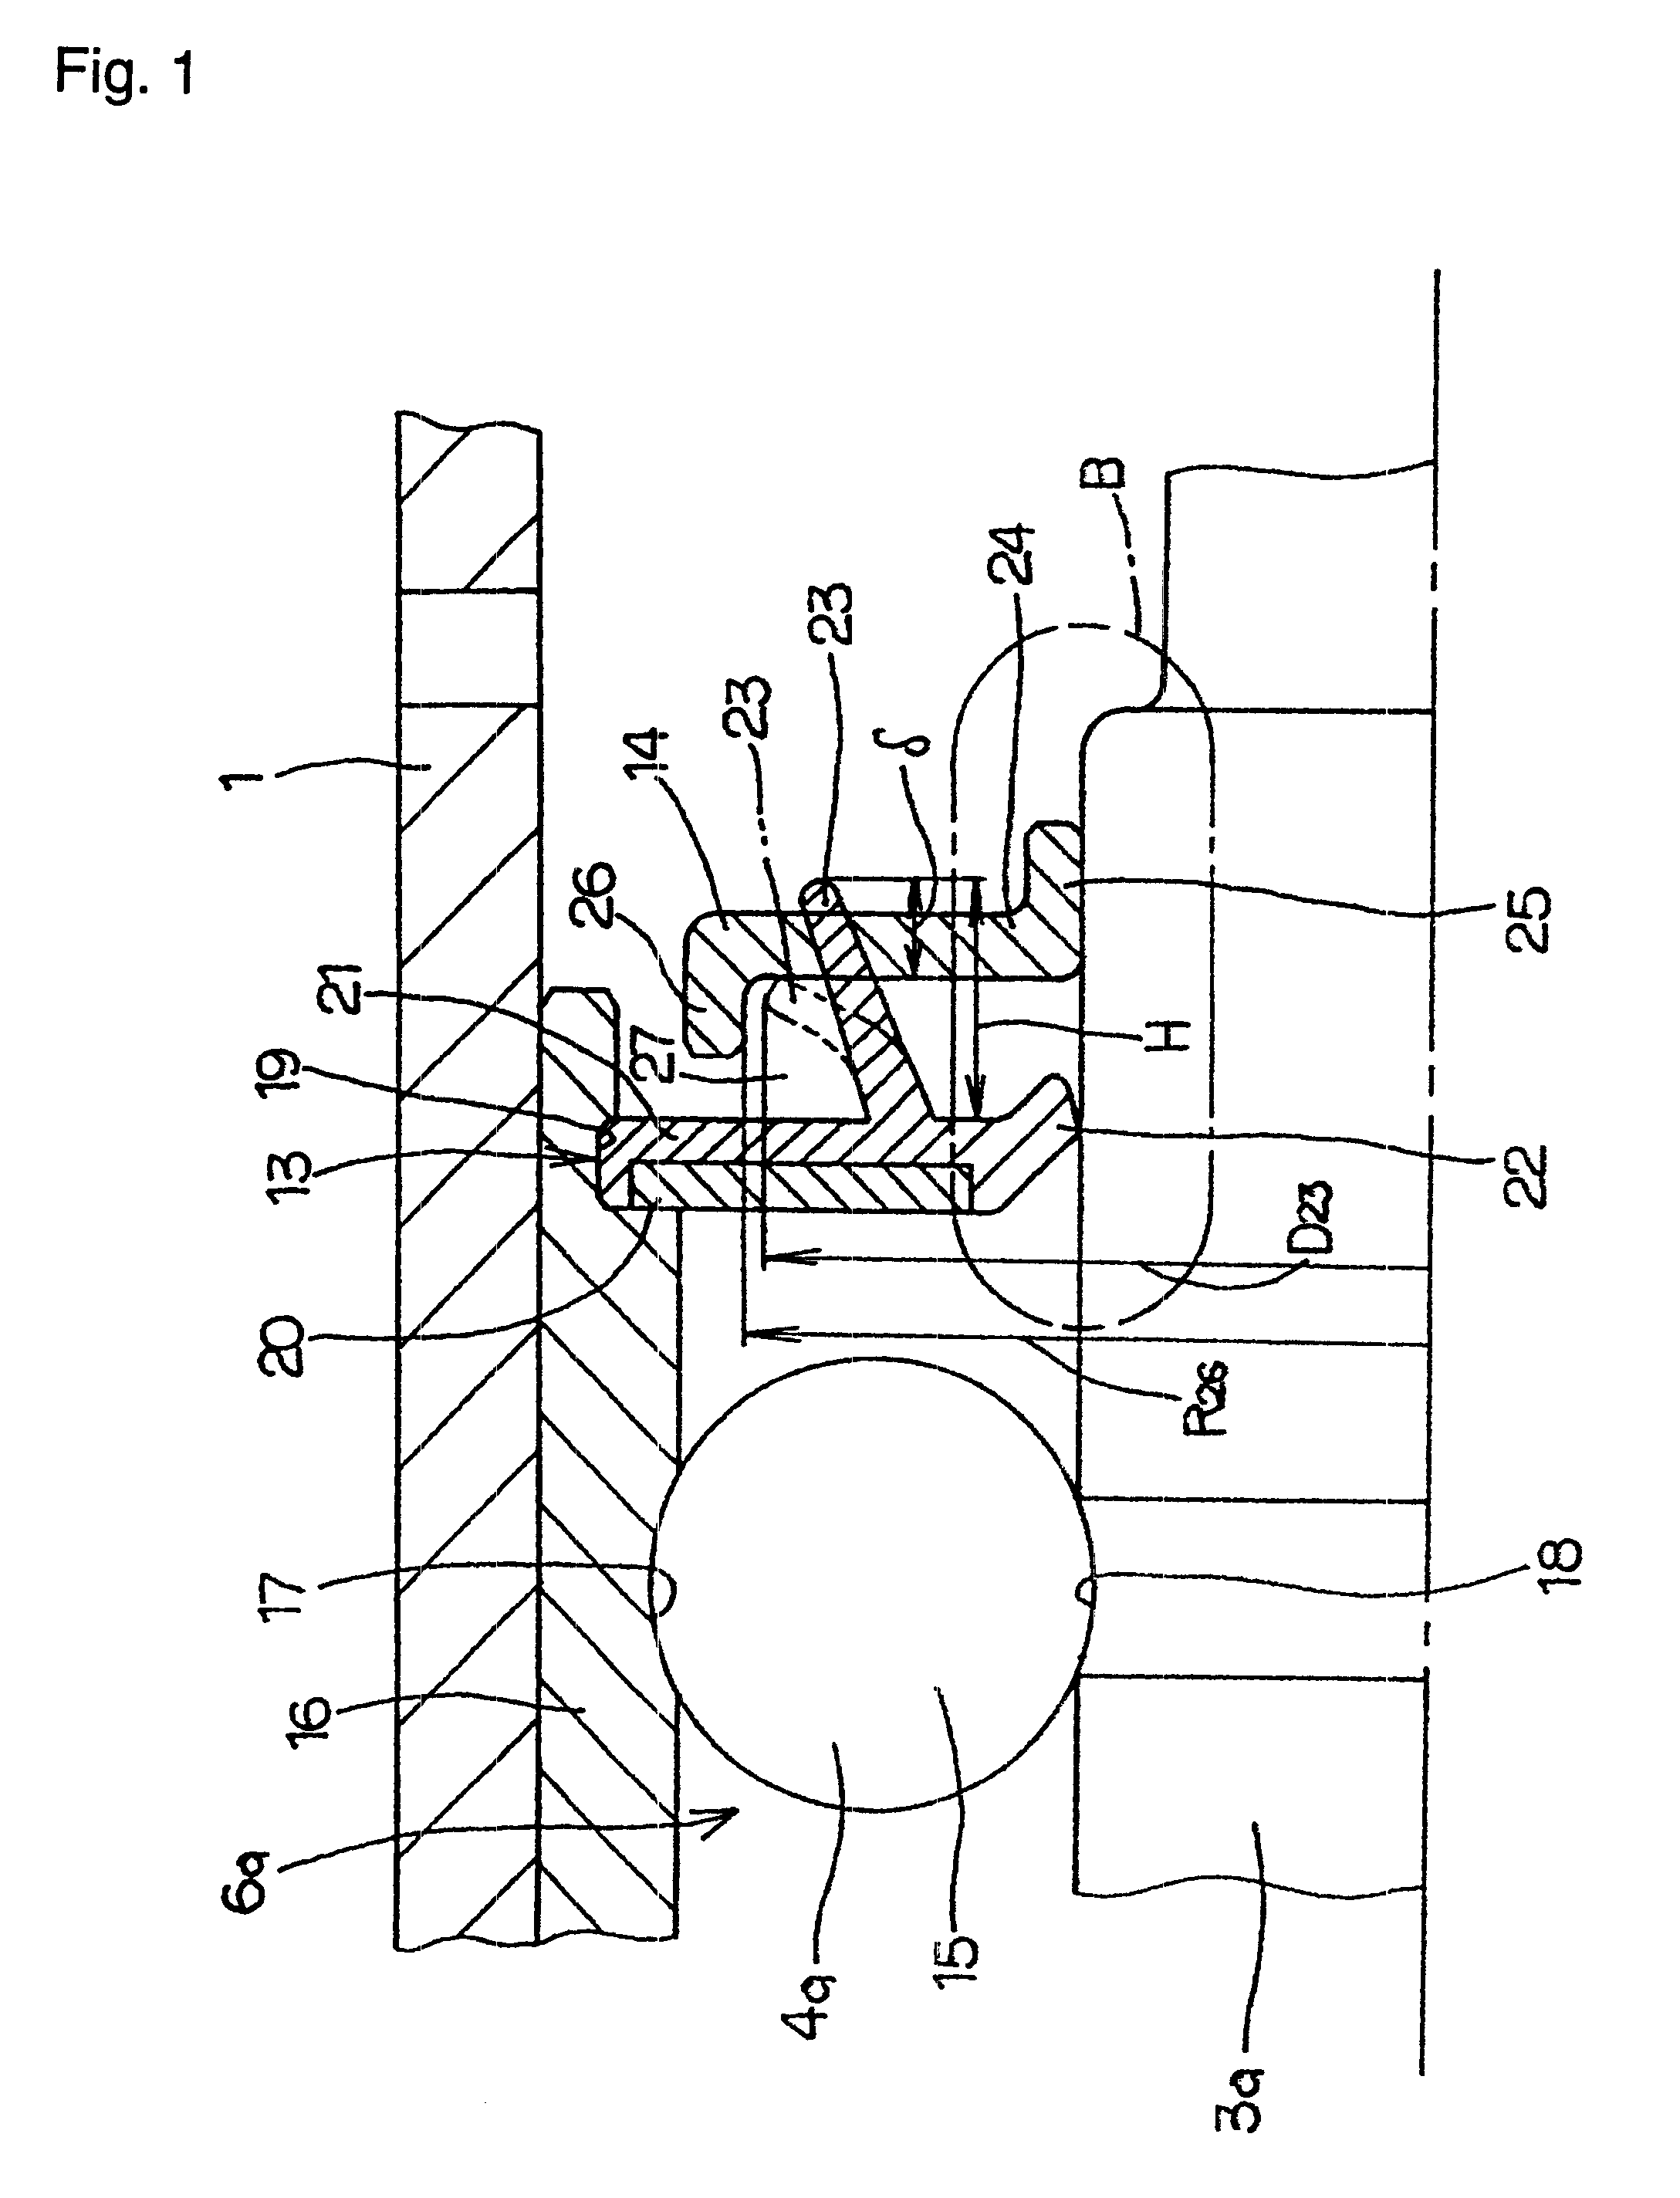 Seal apparatus for a water pump, rotation-support apparatus for a water pump, and a water pump